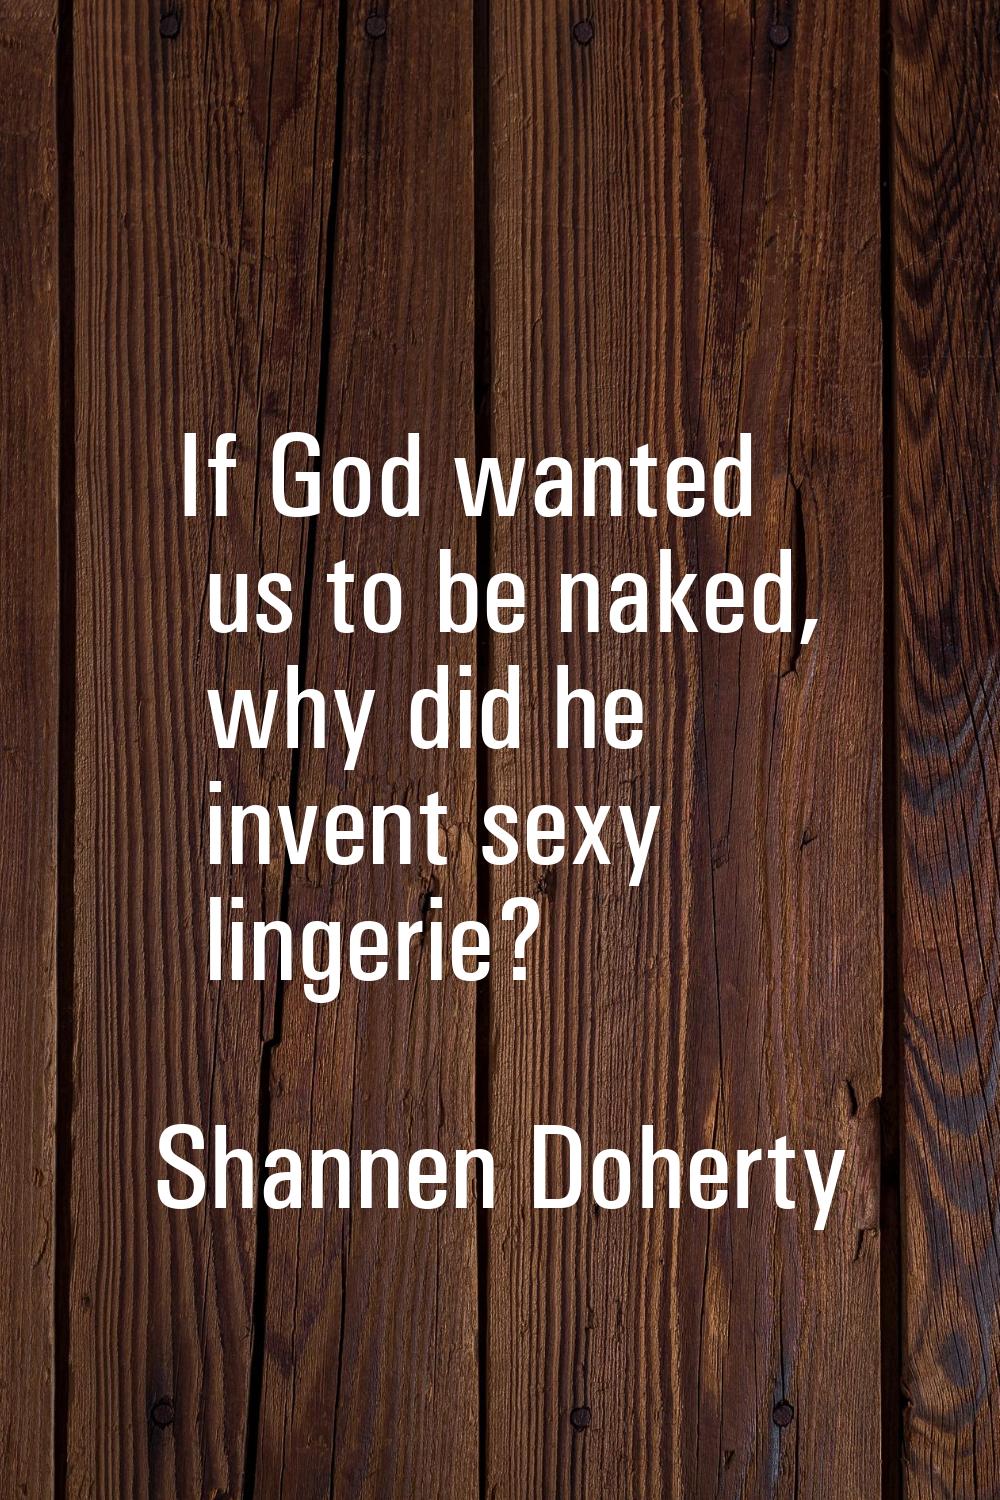 If God wanted us to be naked, why did he invent sexy lingerie?